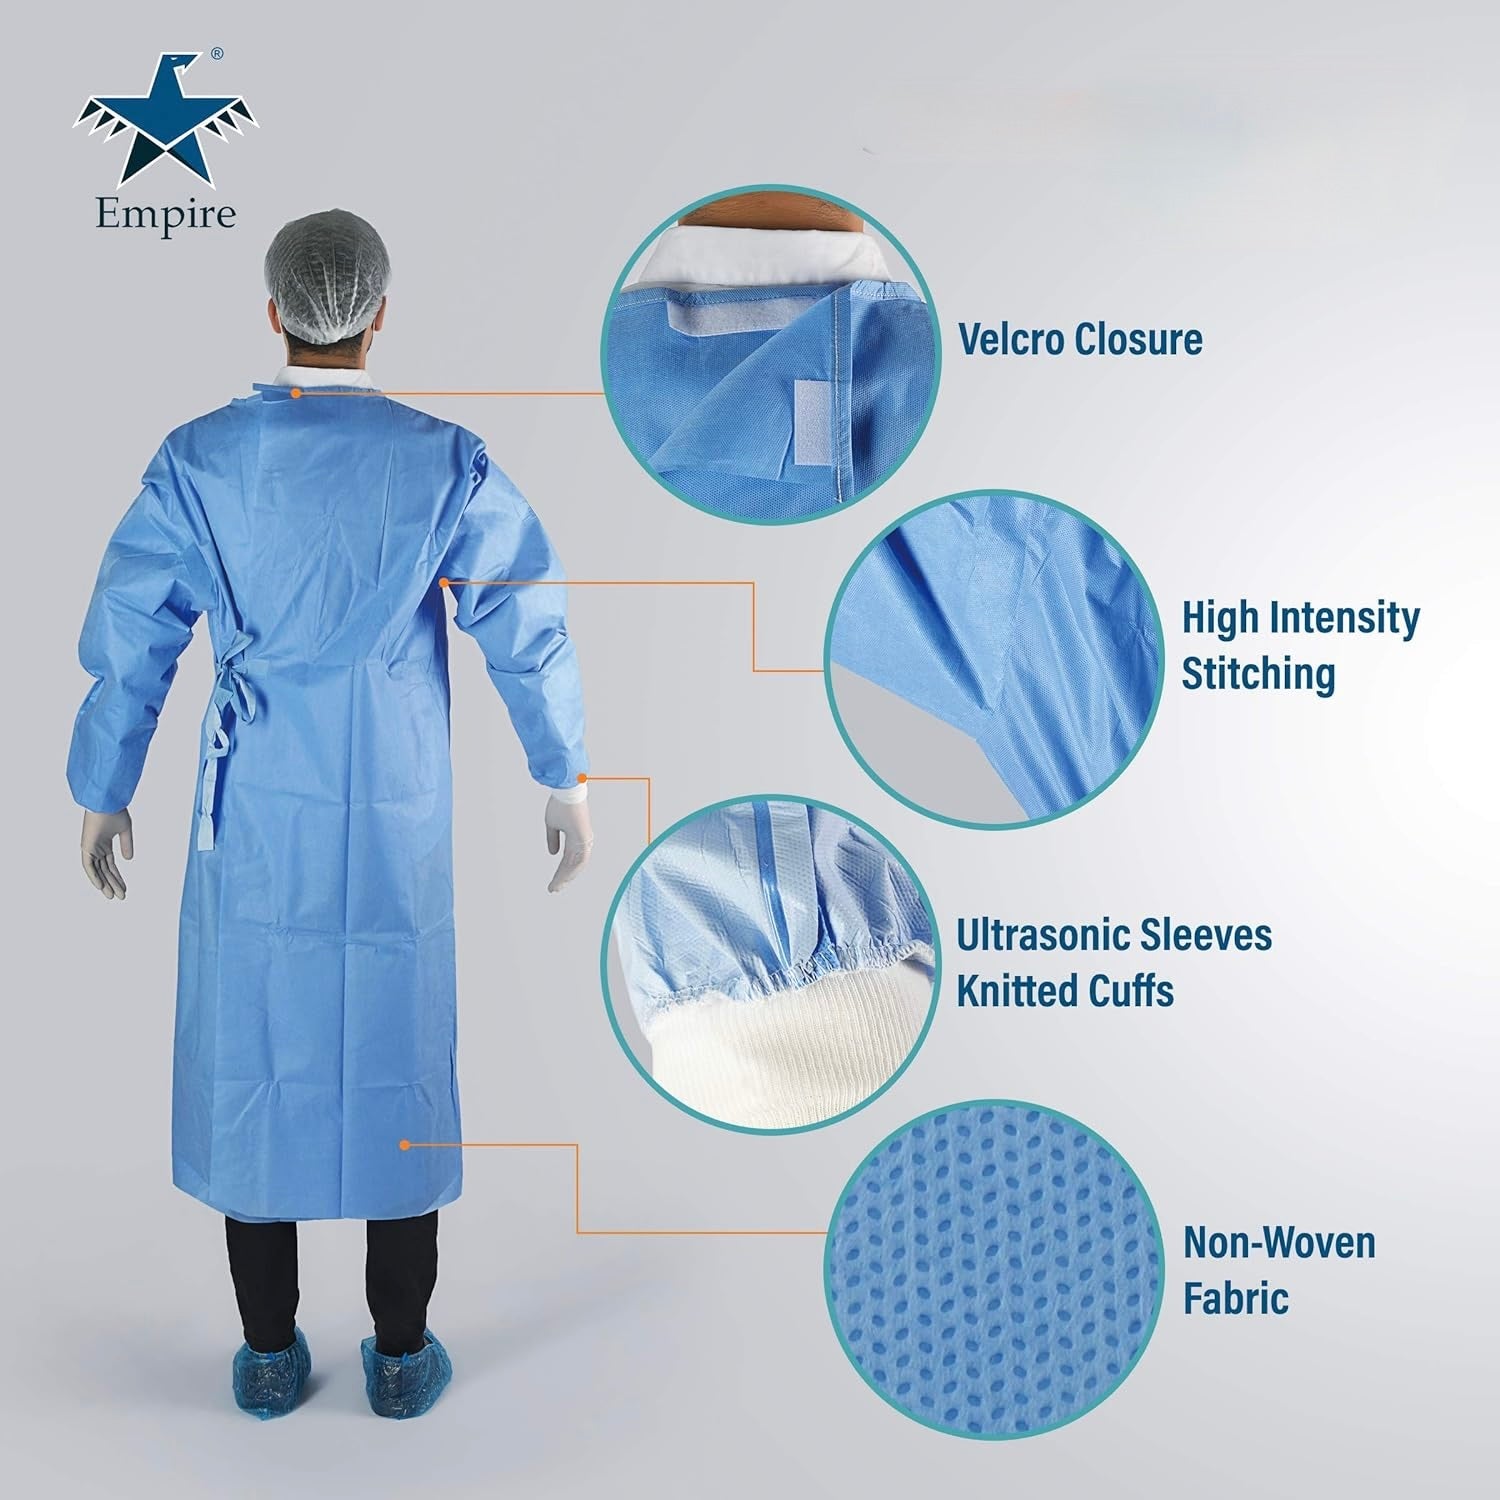 Case 40 Zonal Reinforced Sterile Surgical Gown Double Wrapped with 2 Hand Towels 30 x 40 cm 43gsm SMMS BODY with 40g PP & PE Reinforcement Fluid Alcohol Water Repellent hook and loop fastening Adjustable neckline Raglan Sleeves Size Large EN13795